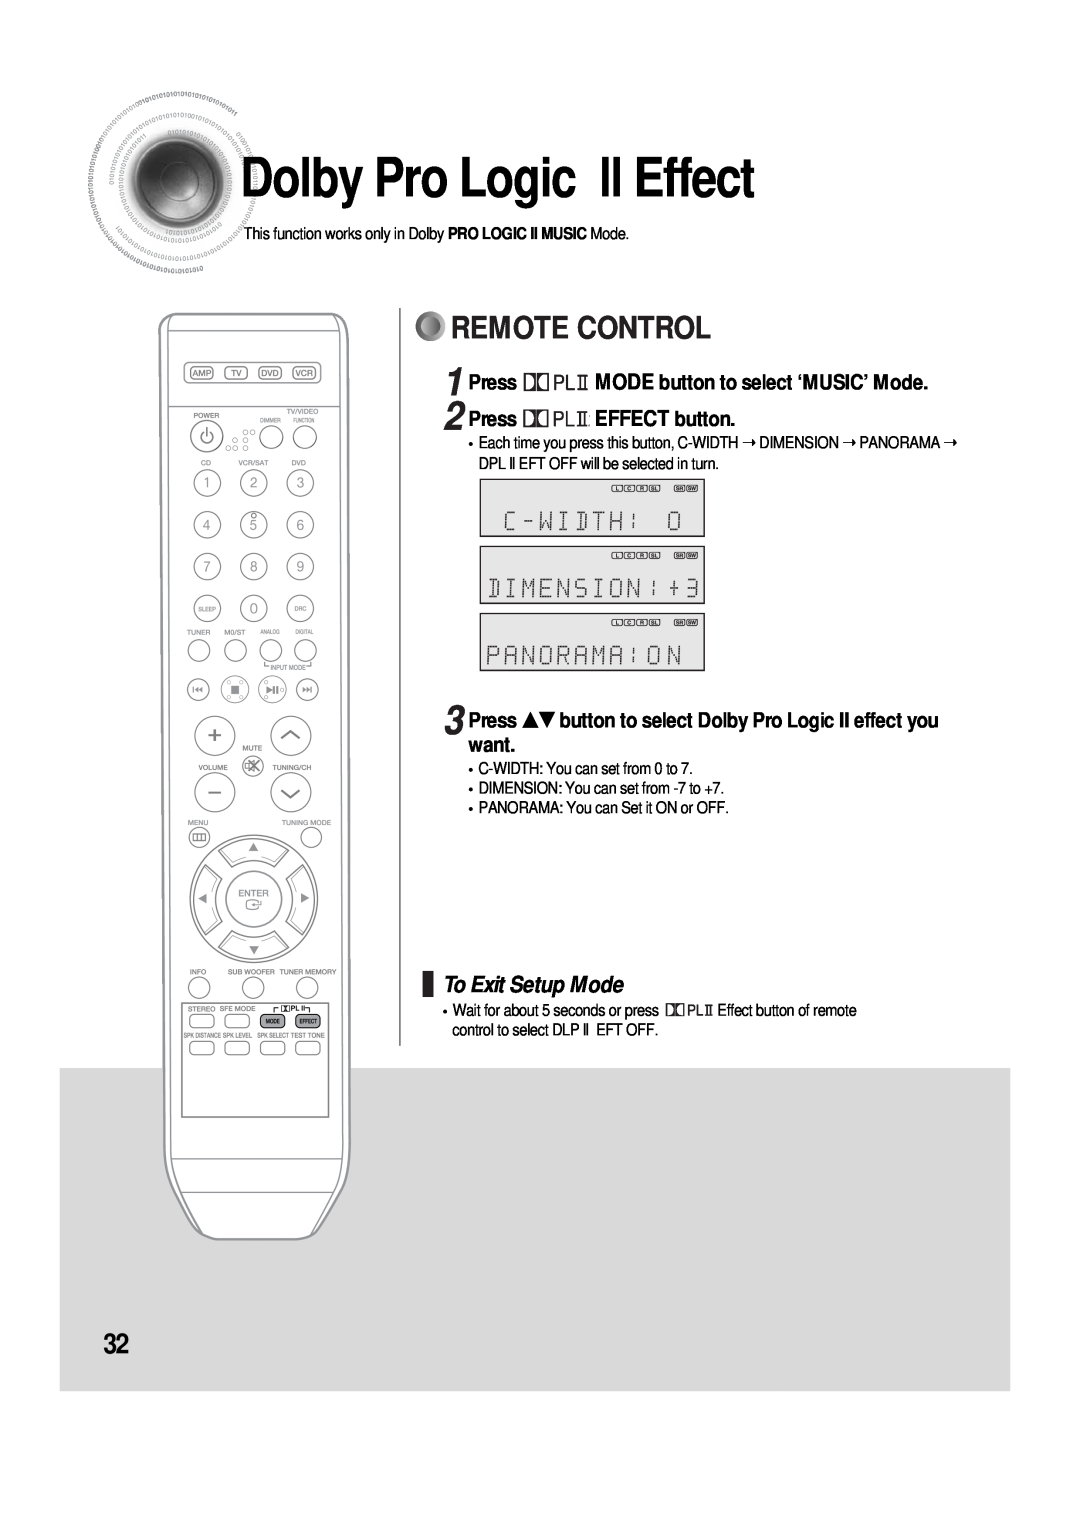 Samsung 20060510083254531, AH68-01853S DolbyPro Logic ll Effect, Remote Control, To Exit Setup Mode, Press EFFECT button 